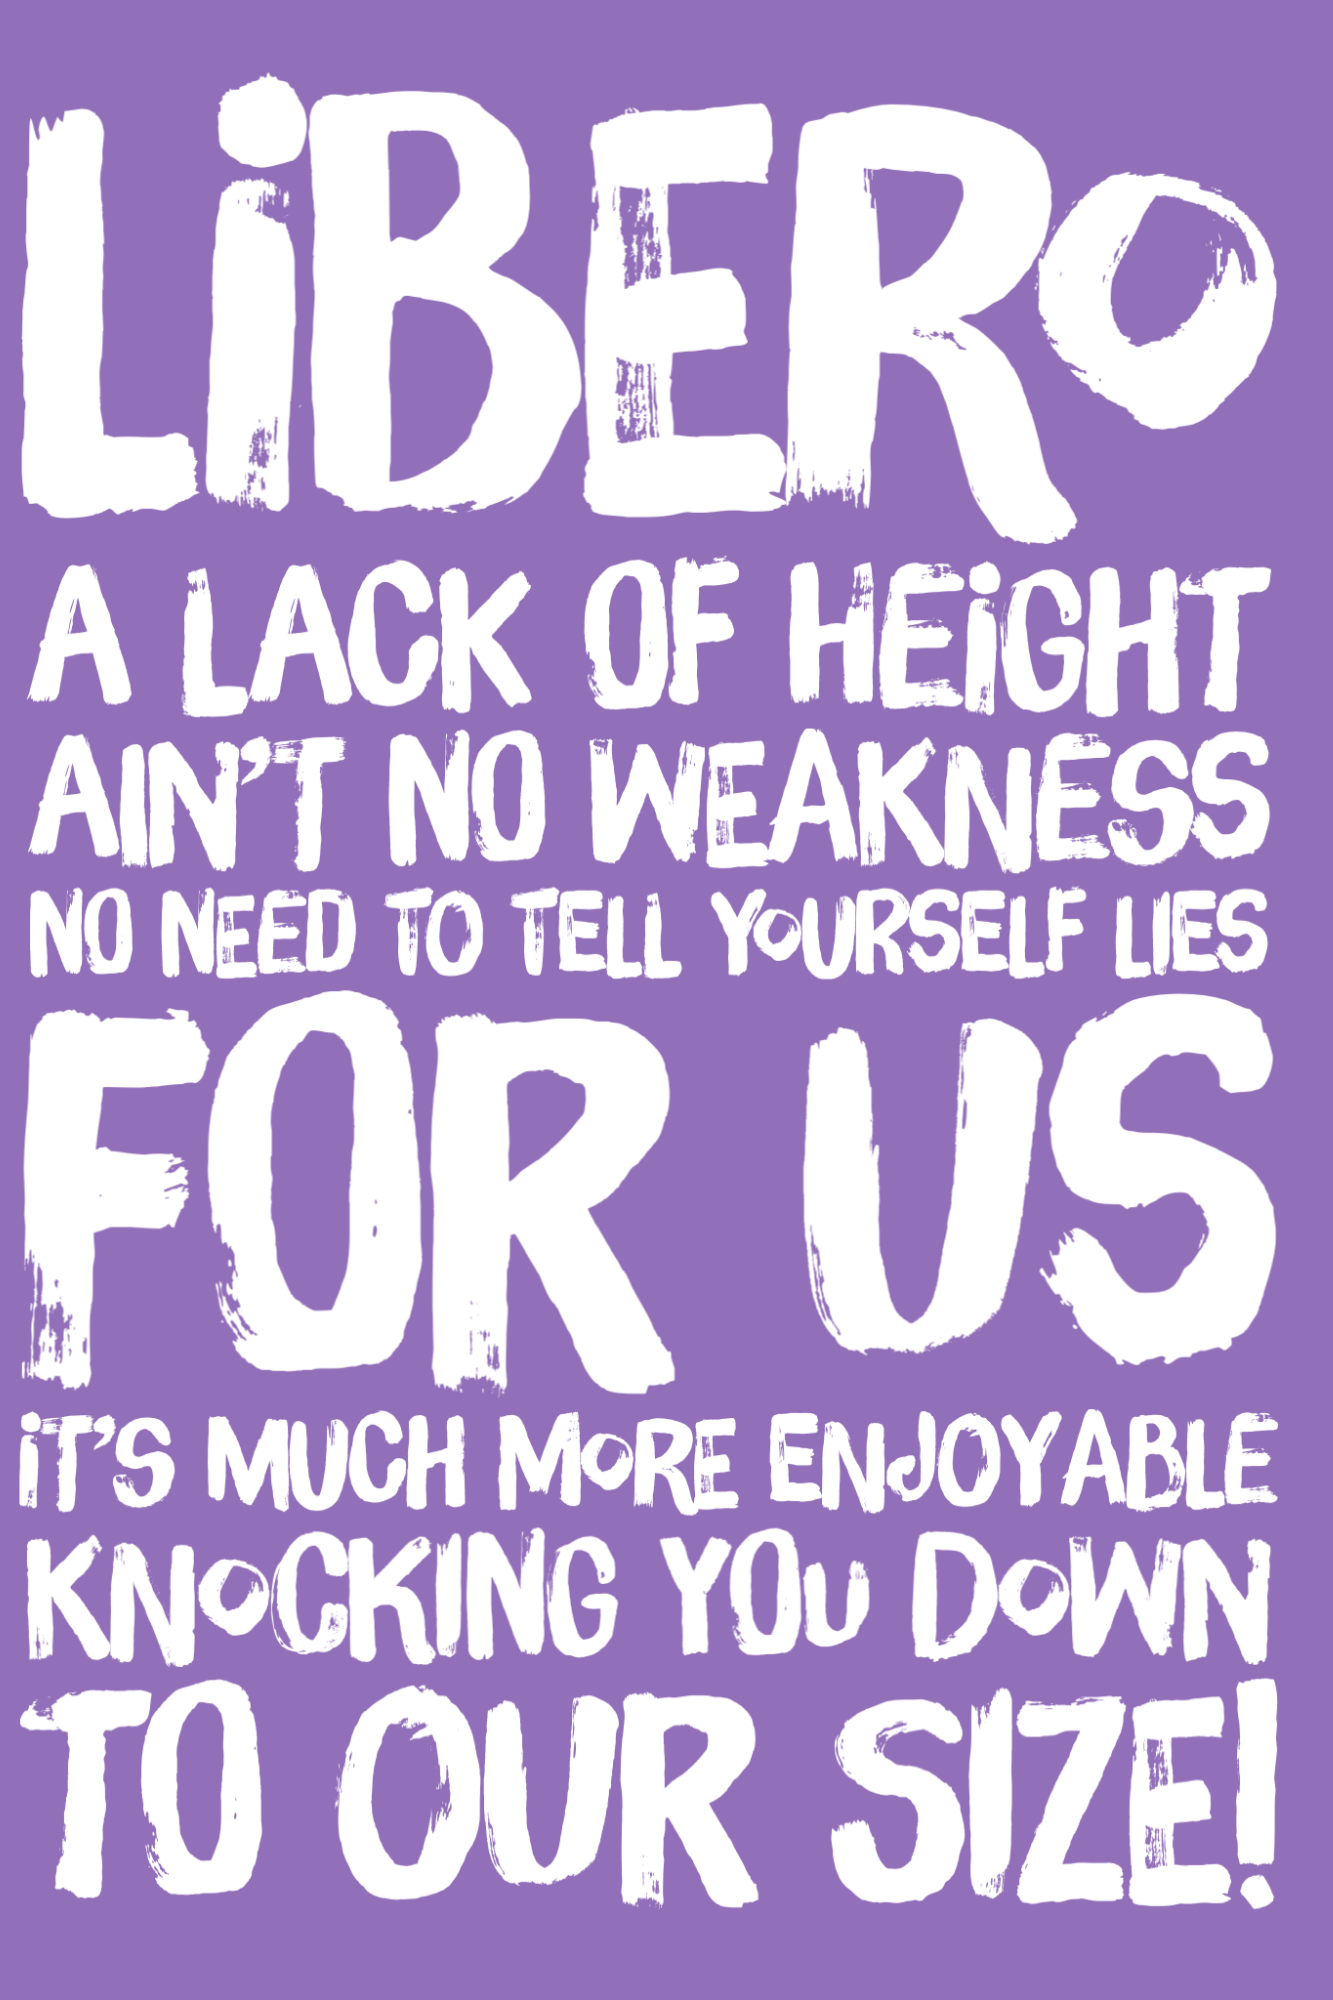 LIBERO        A Lack of Height Aint No Weakness No Need To Tell Yourself Lies, For Us Its More Enjoyable Cutting You Down To Our Size